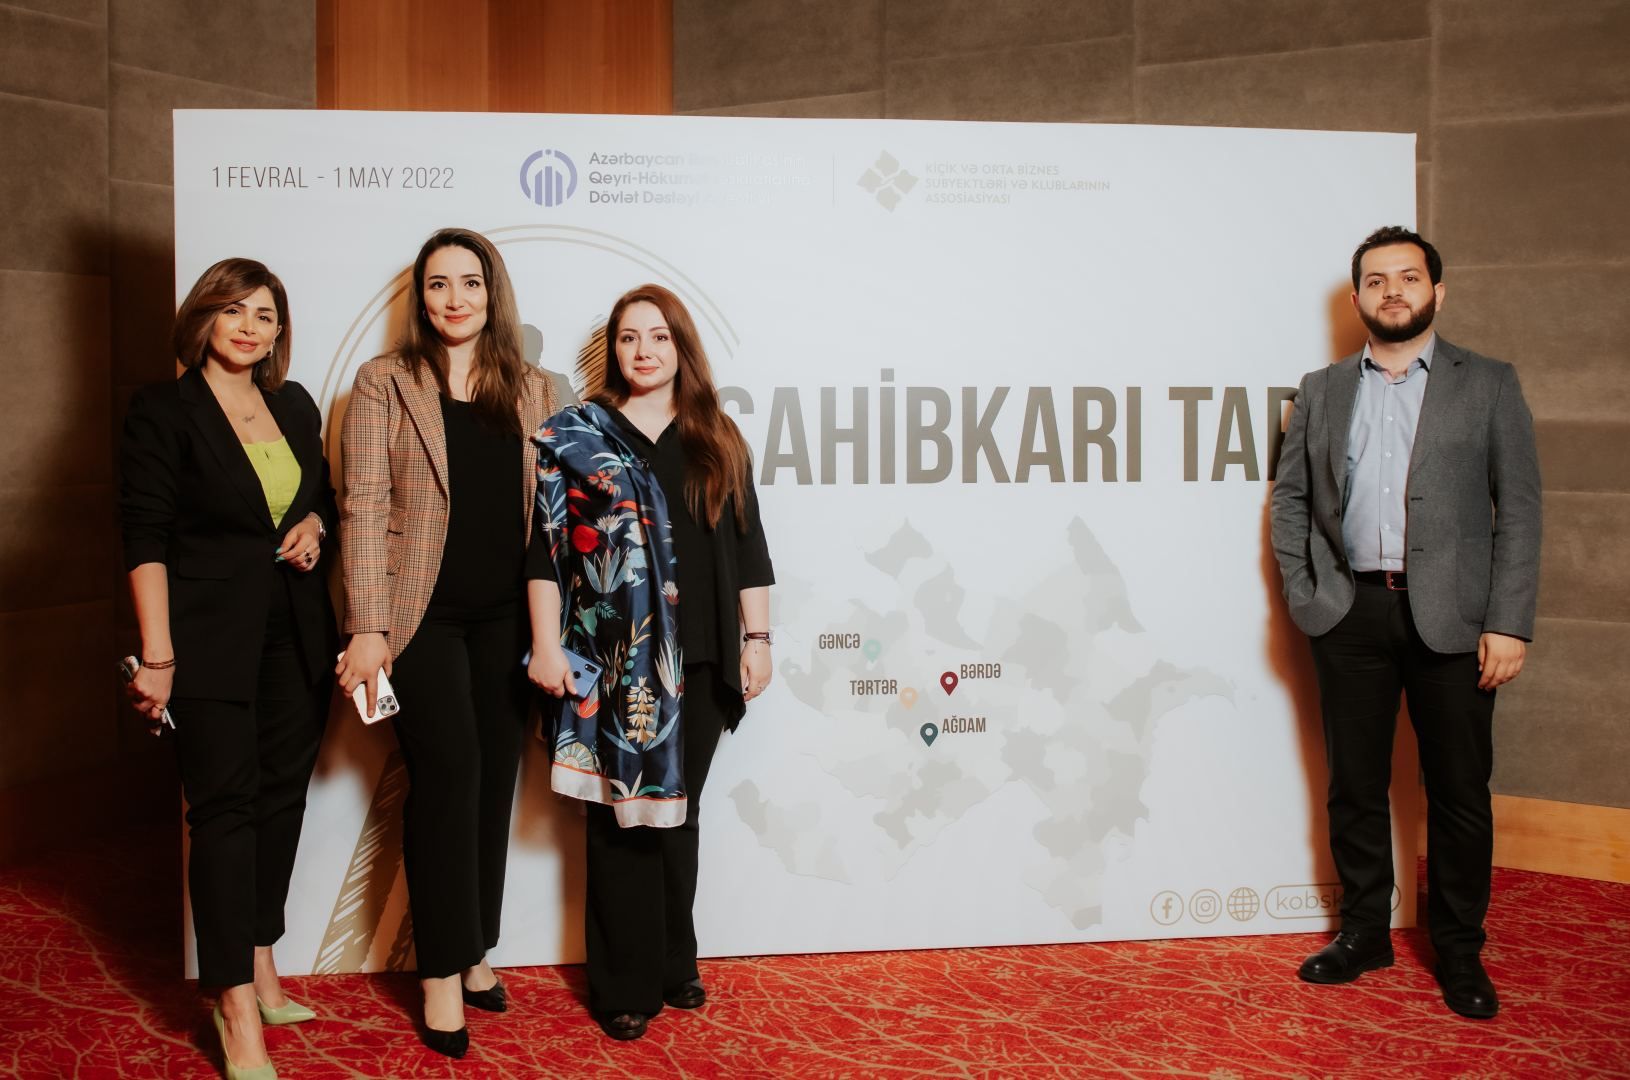 Interest in business activity growing in Azerbaijan - Association of Small & Medium Enterprises & Clubs [PHOTO] - Gallery Image